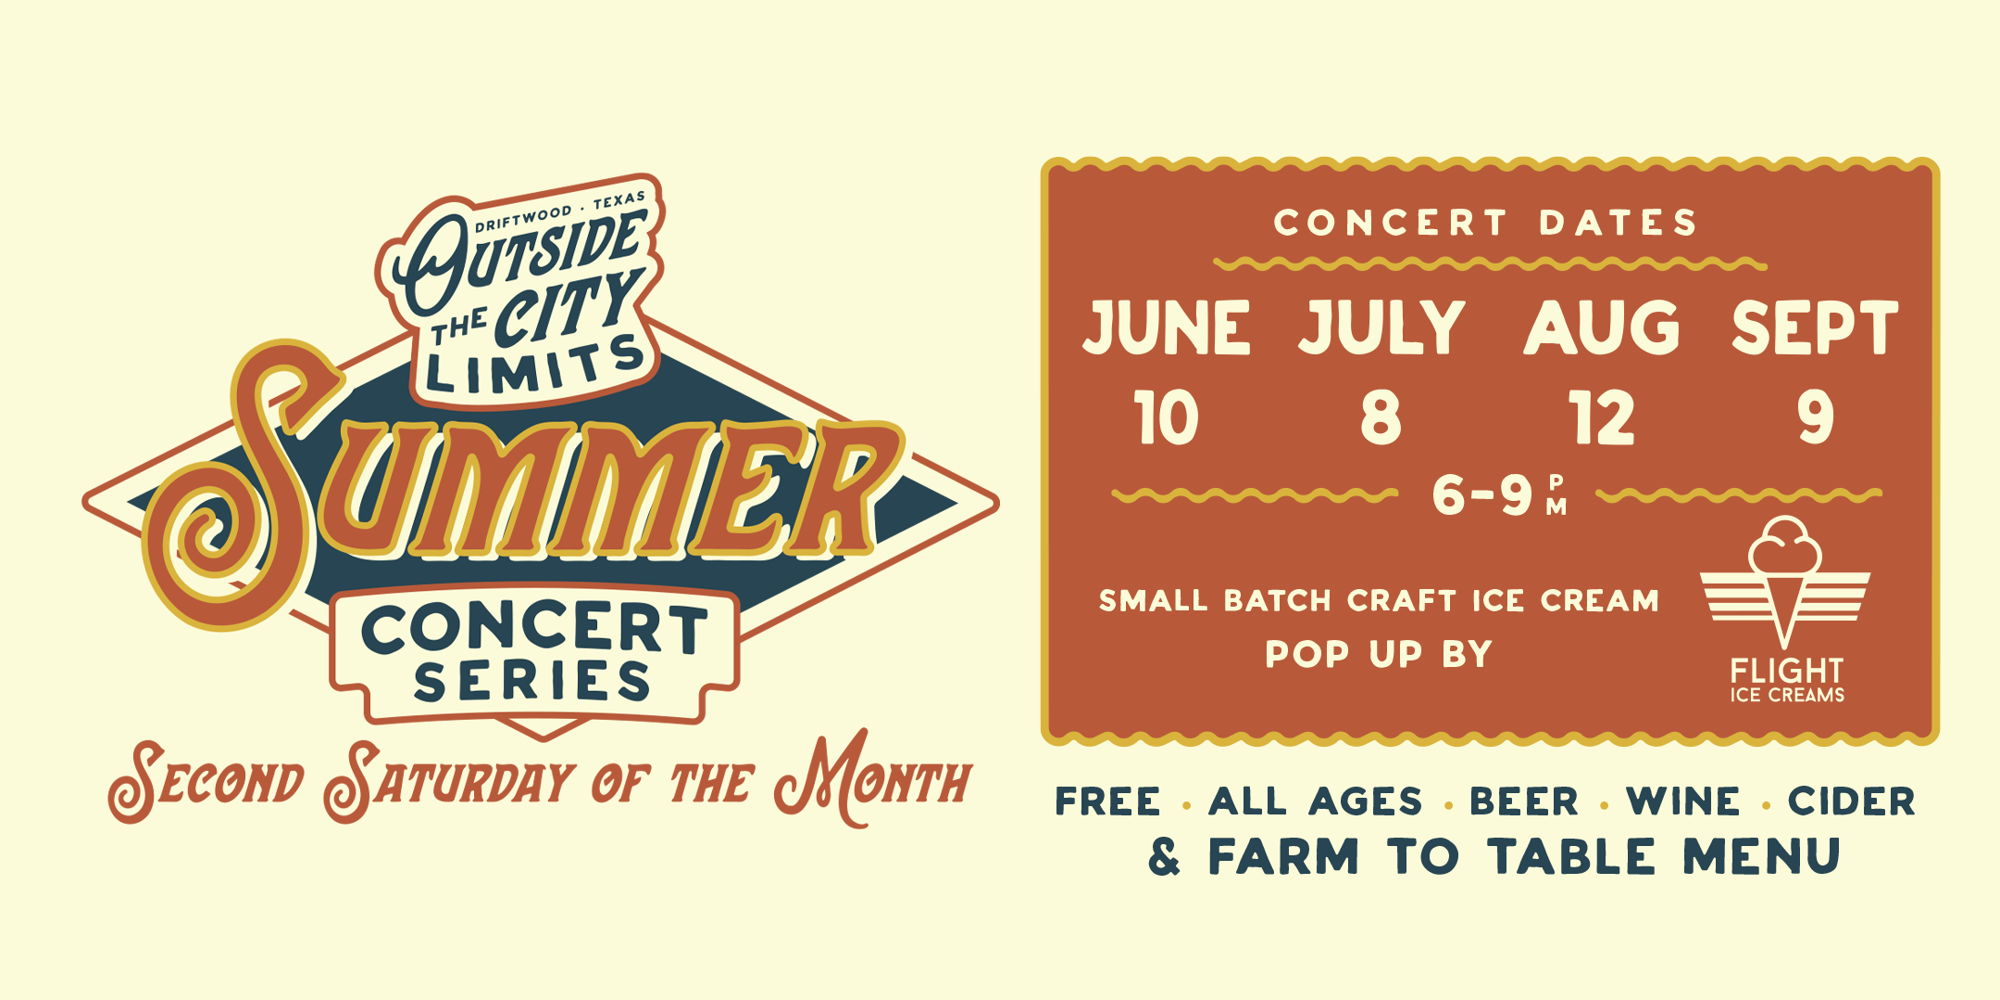 Vista Brewing Presents: Outside the City Limits Summer Concert Series  promotional image